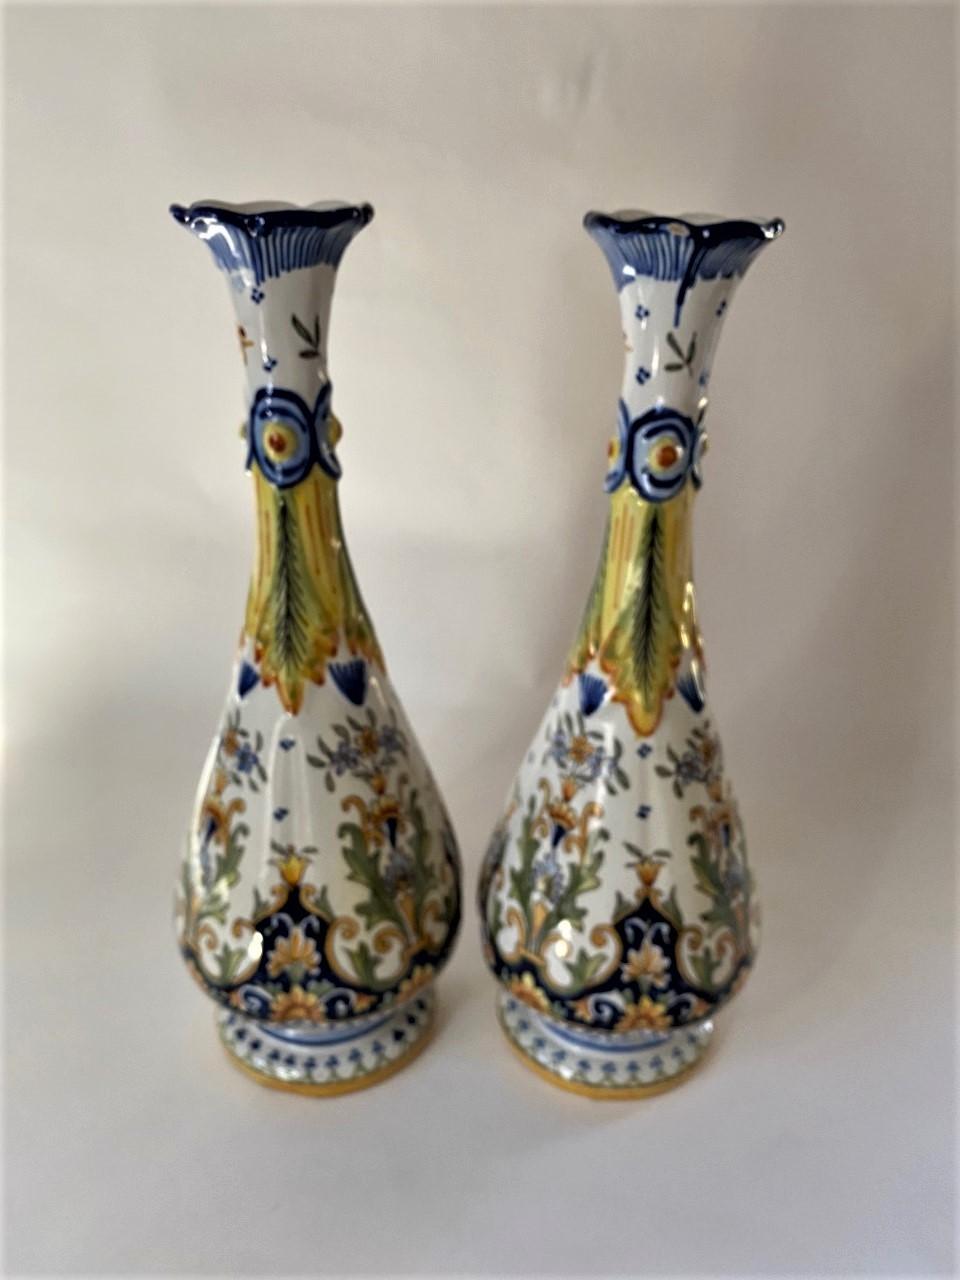 Attractive Pair of Old Faience Tall Vases from England, circa 1880 In Good Condition For Sale In North Salem, NY